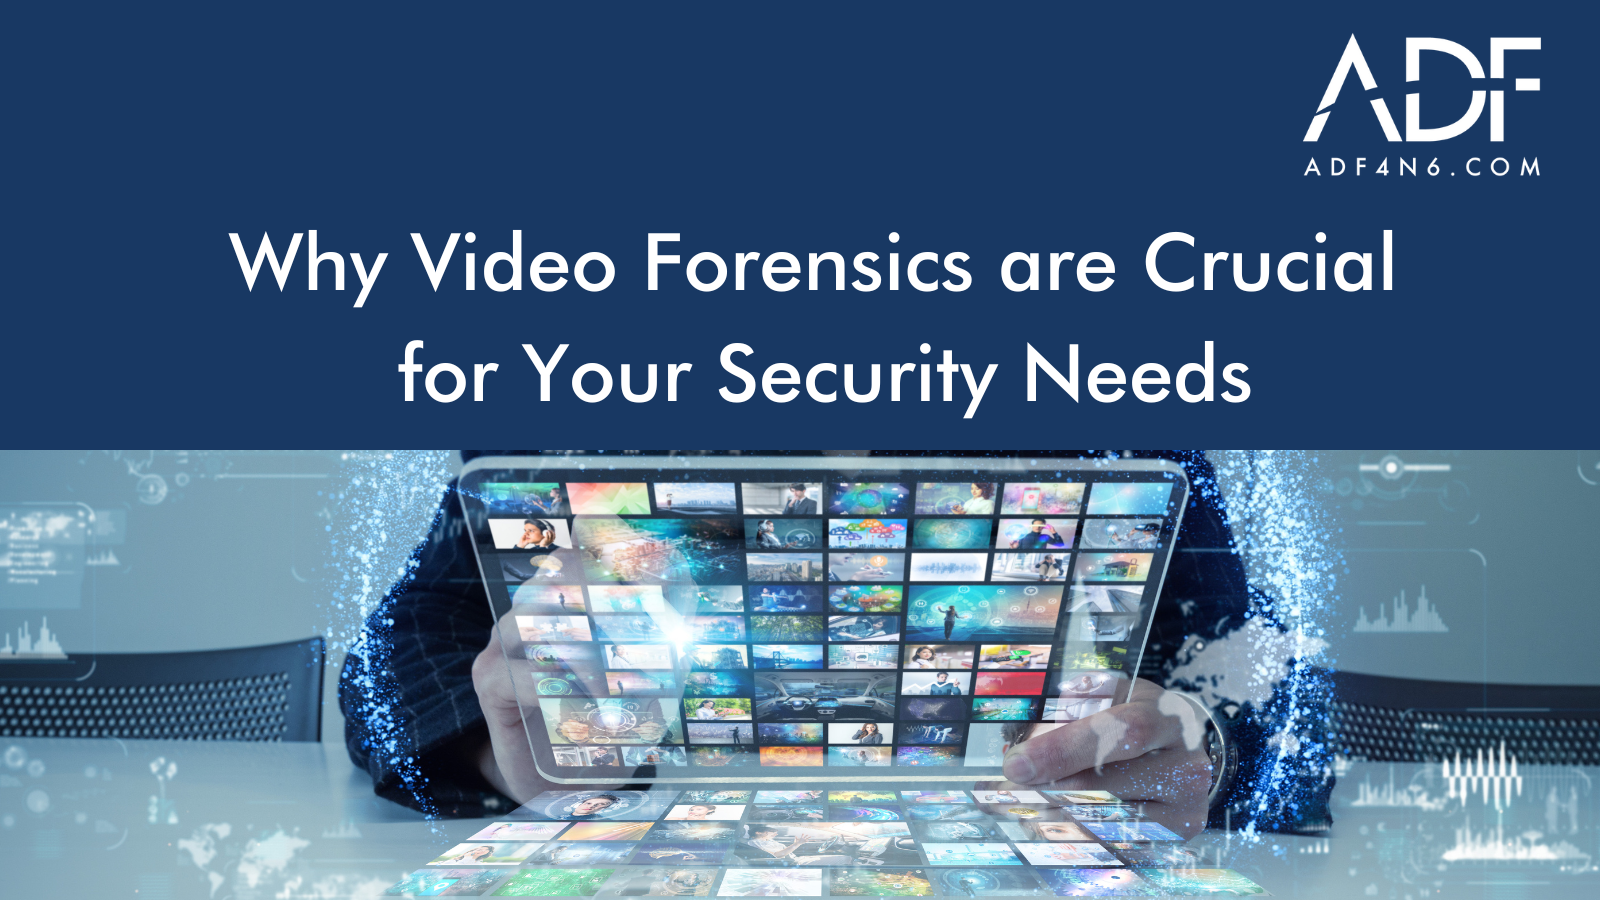 Why Video Forensics are Crucial for Your Security Needs: What ADF Does